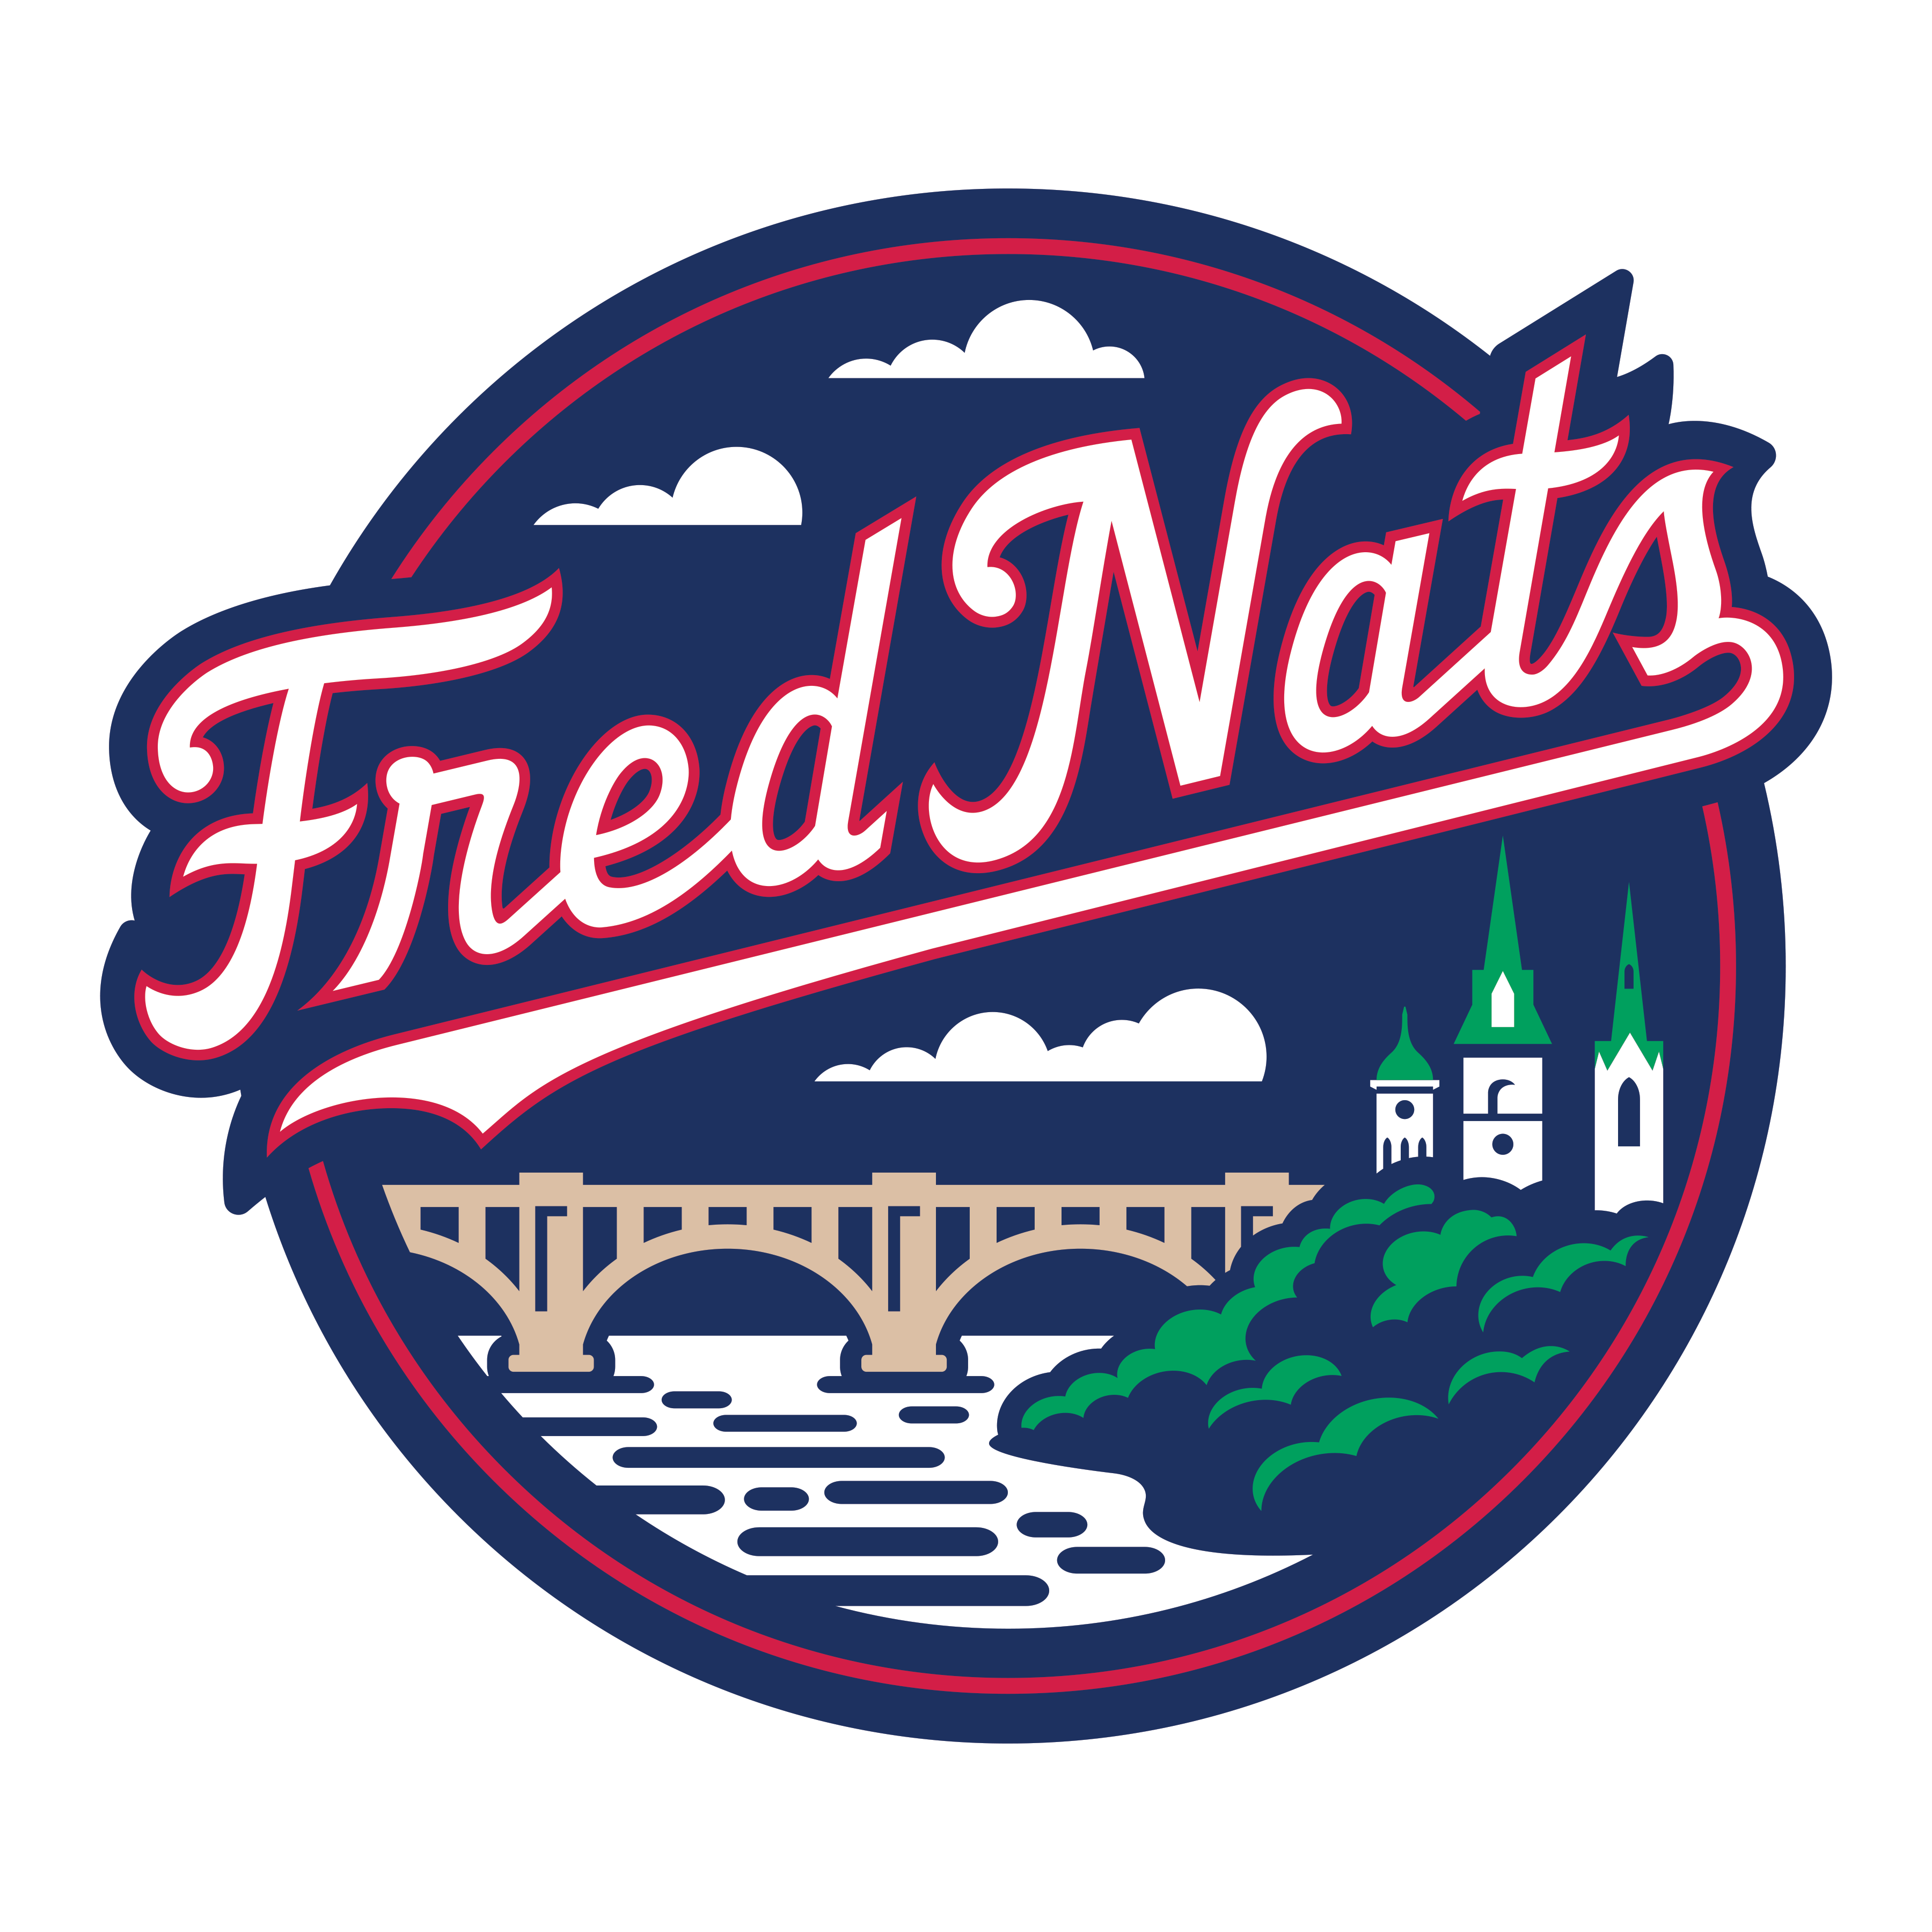 2. Fred Nats (Tier 2)